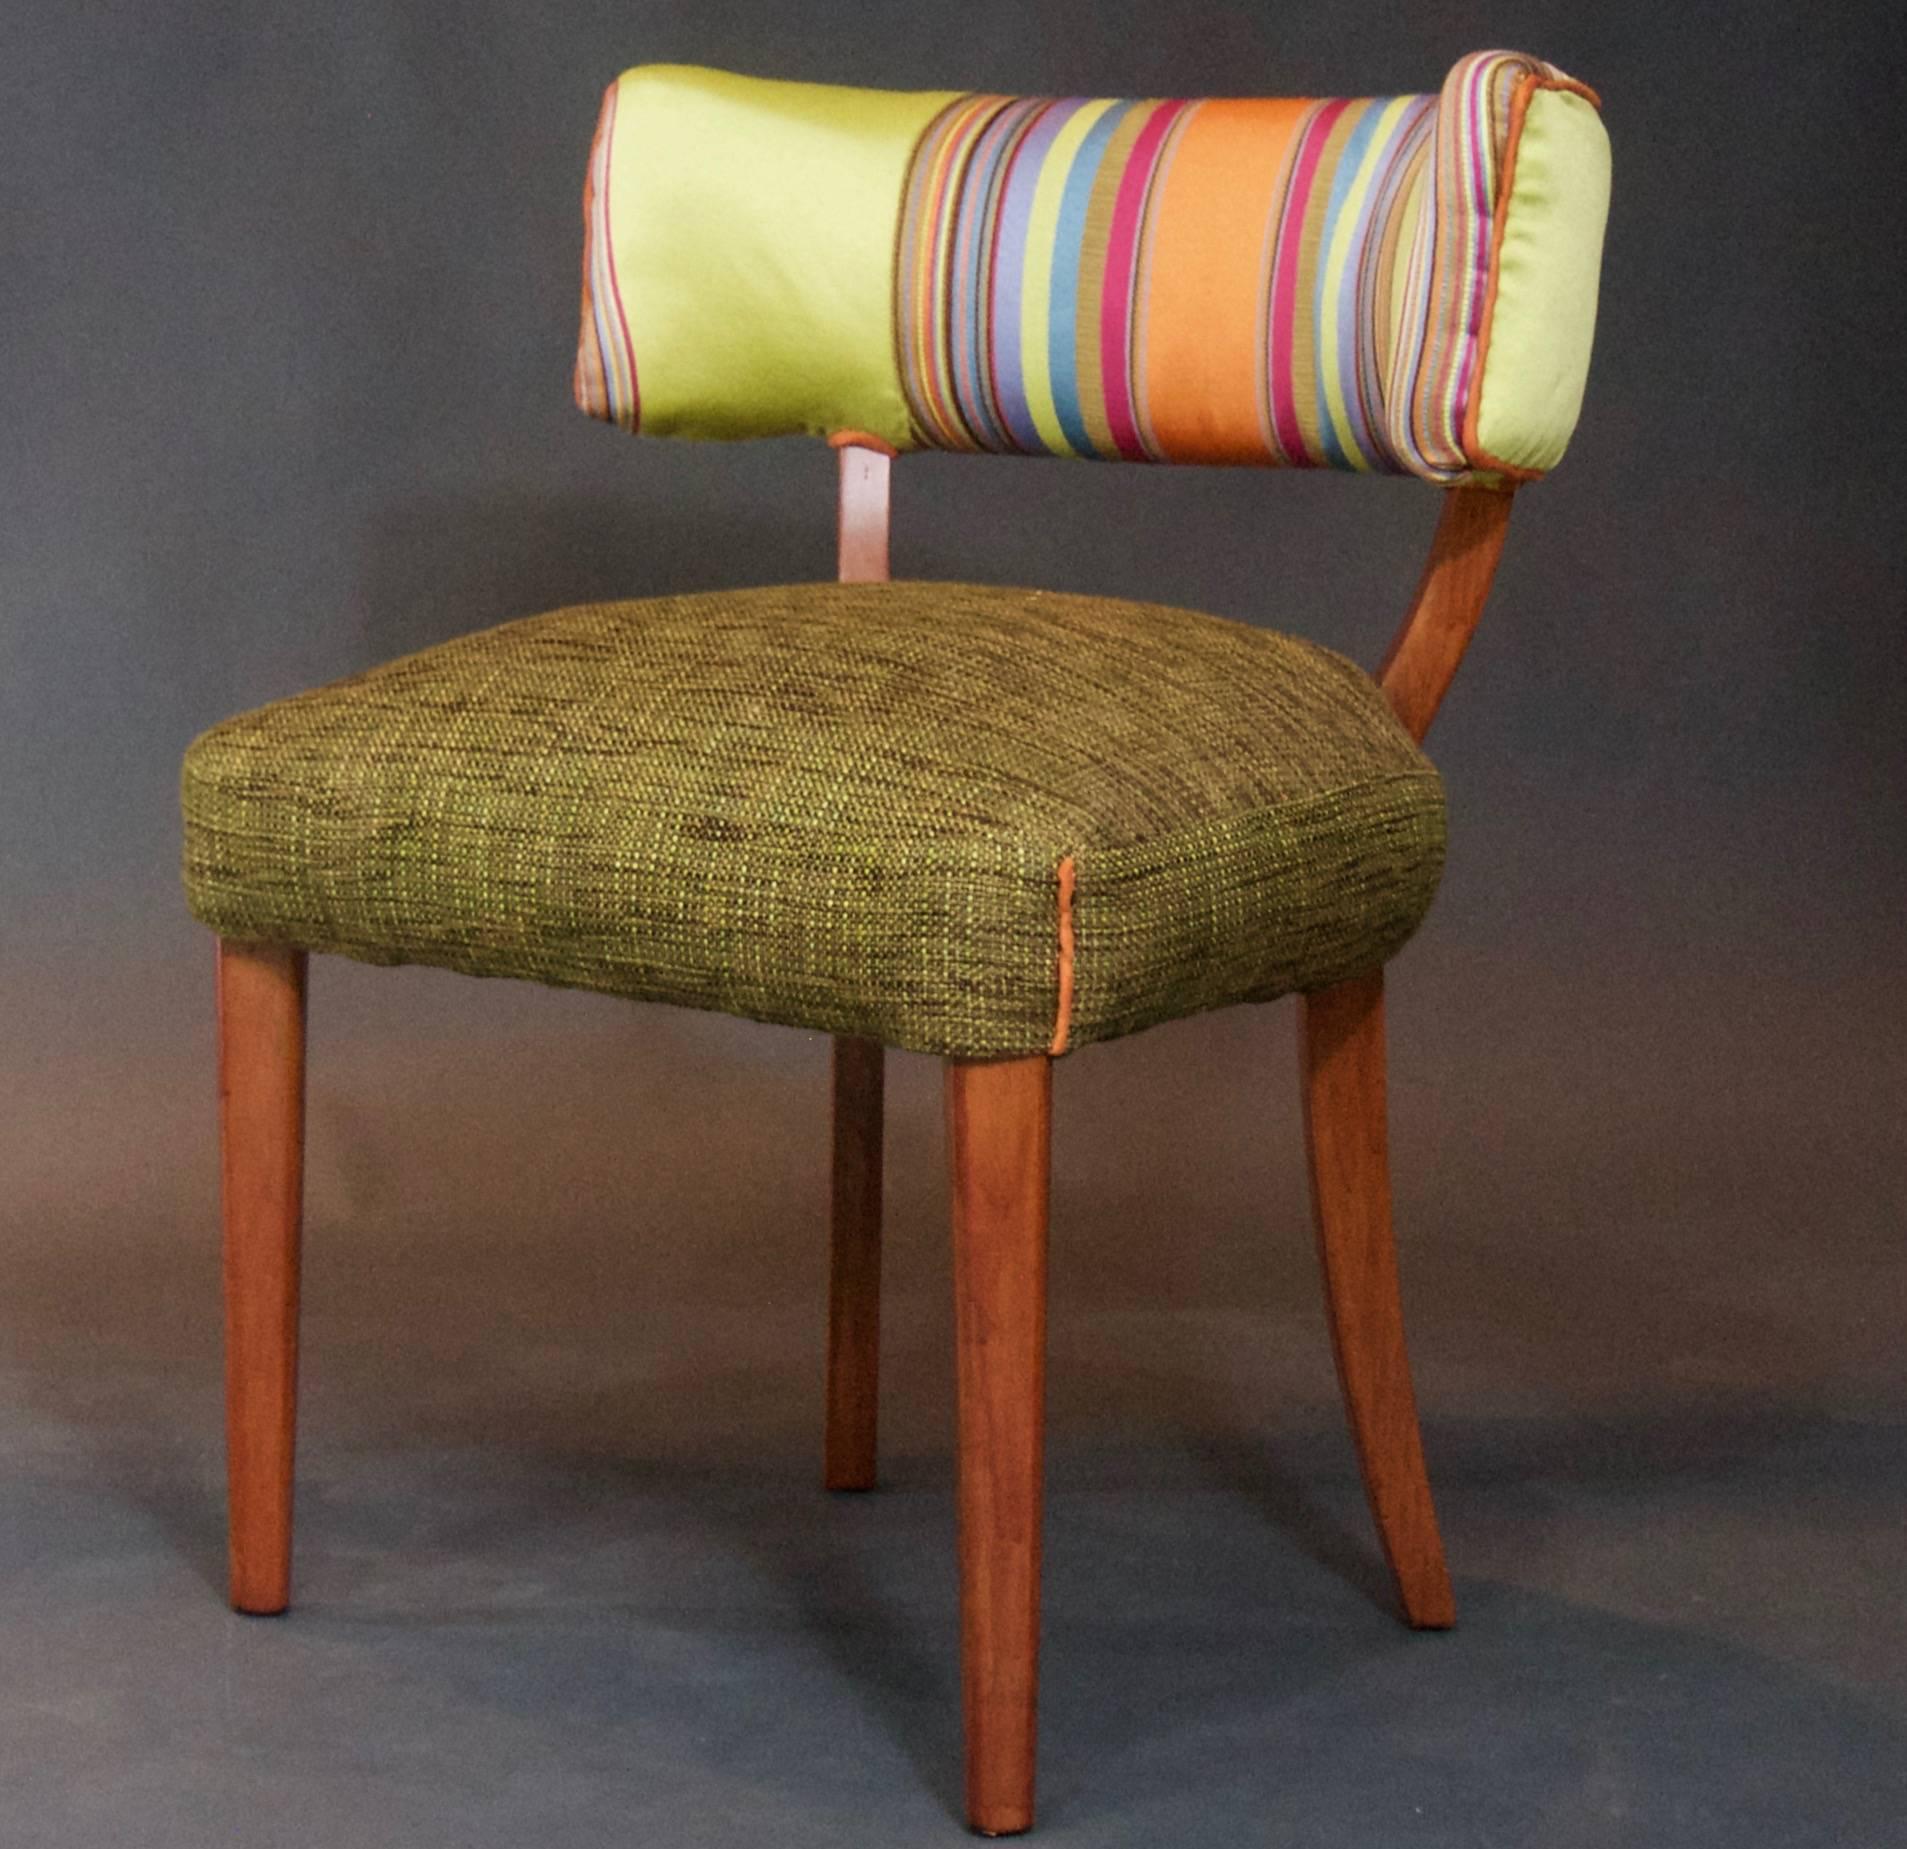 A cheery side chair with a sleek, striped backrest and tweedy seat trimmed in orange ultra suede.  Hardwood legs have been sanded and refinished with a rich pecan stain.  Coordinates nicely with our bench using the same striped fabric.

Like all